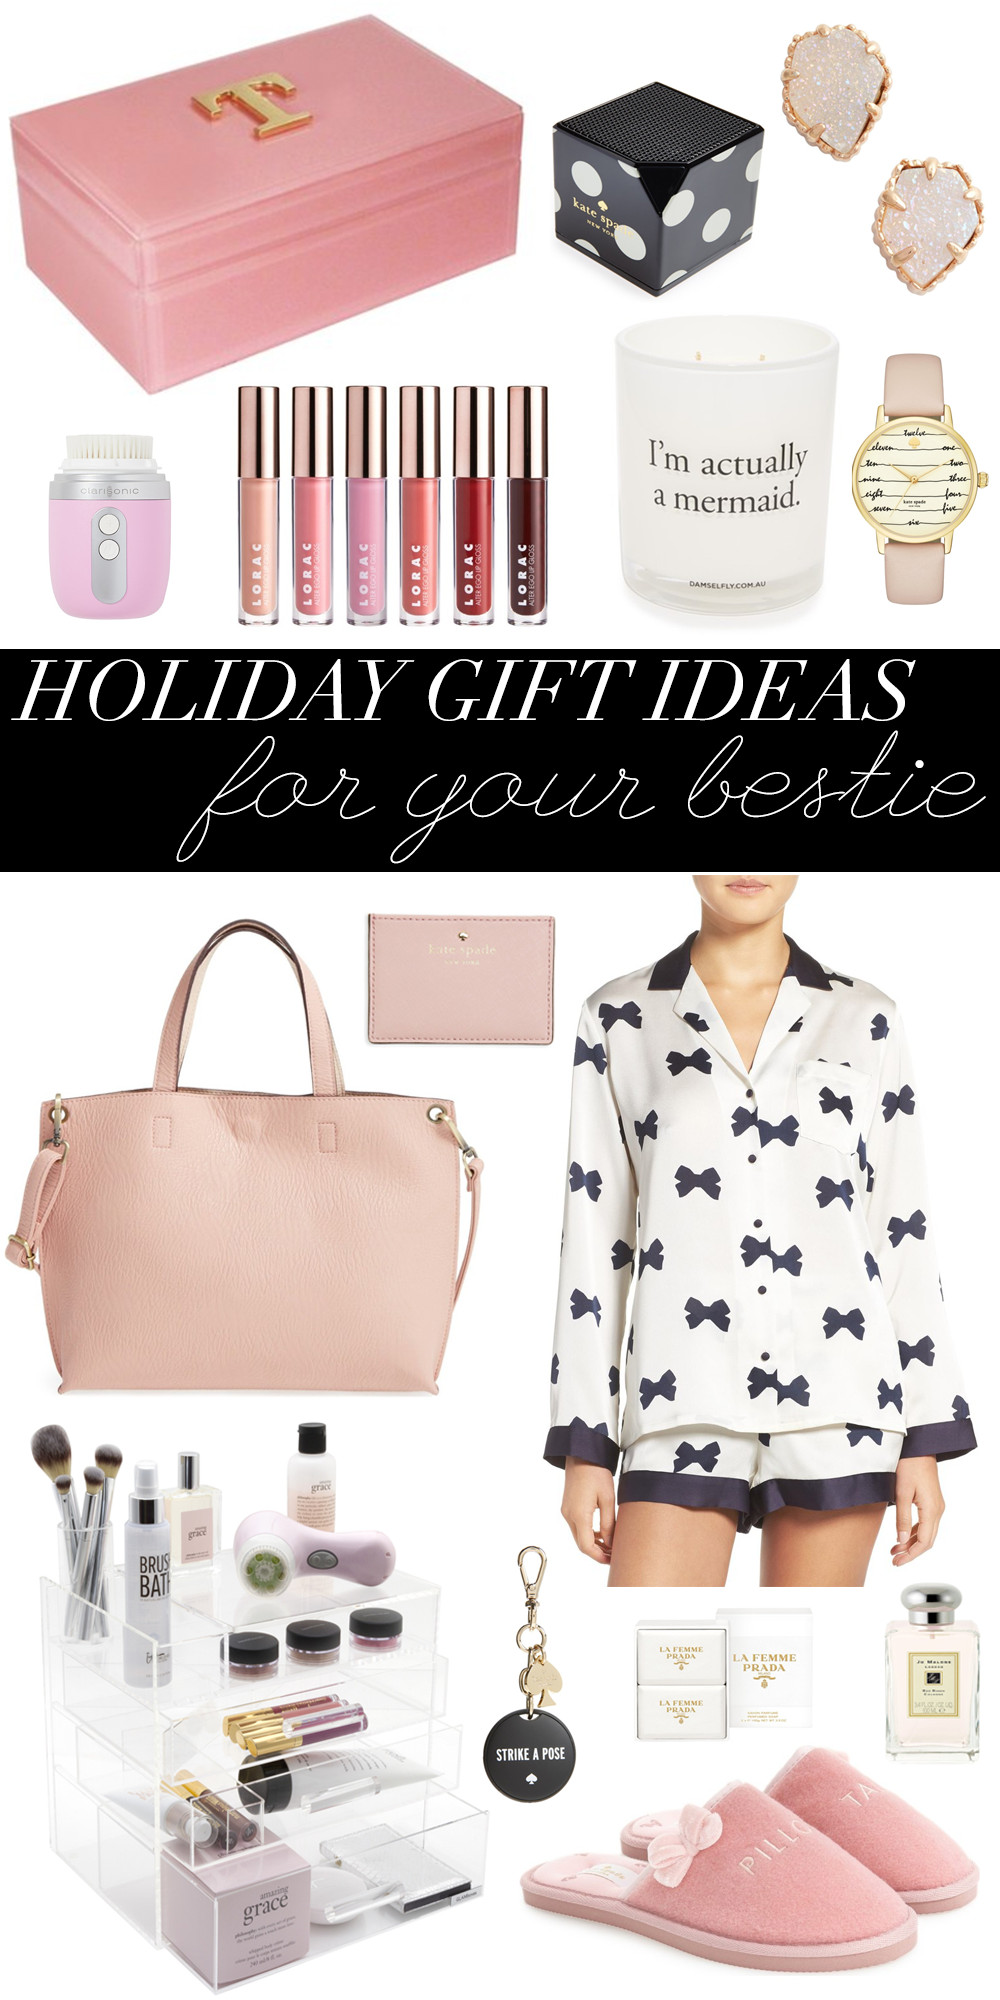 Holiday Gift Ideas For Your Best Friend
 Holiday Gift Ideas For Your Best Friend Giveaway Money